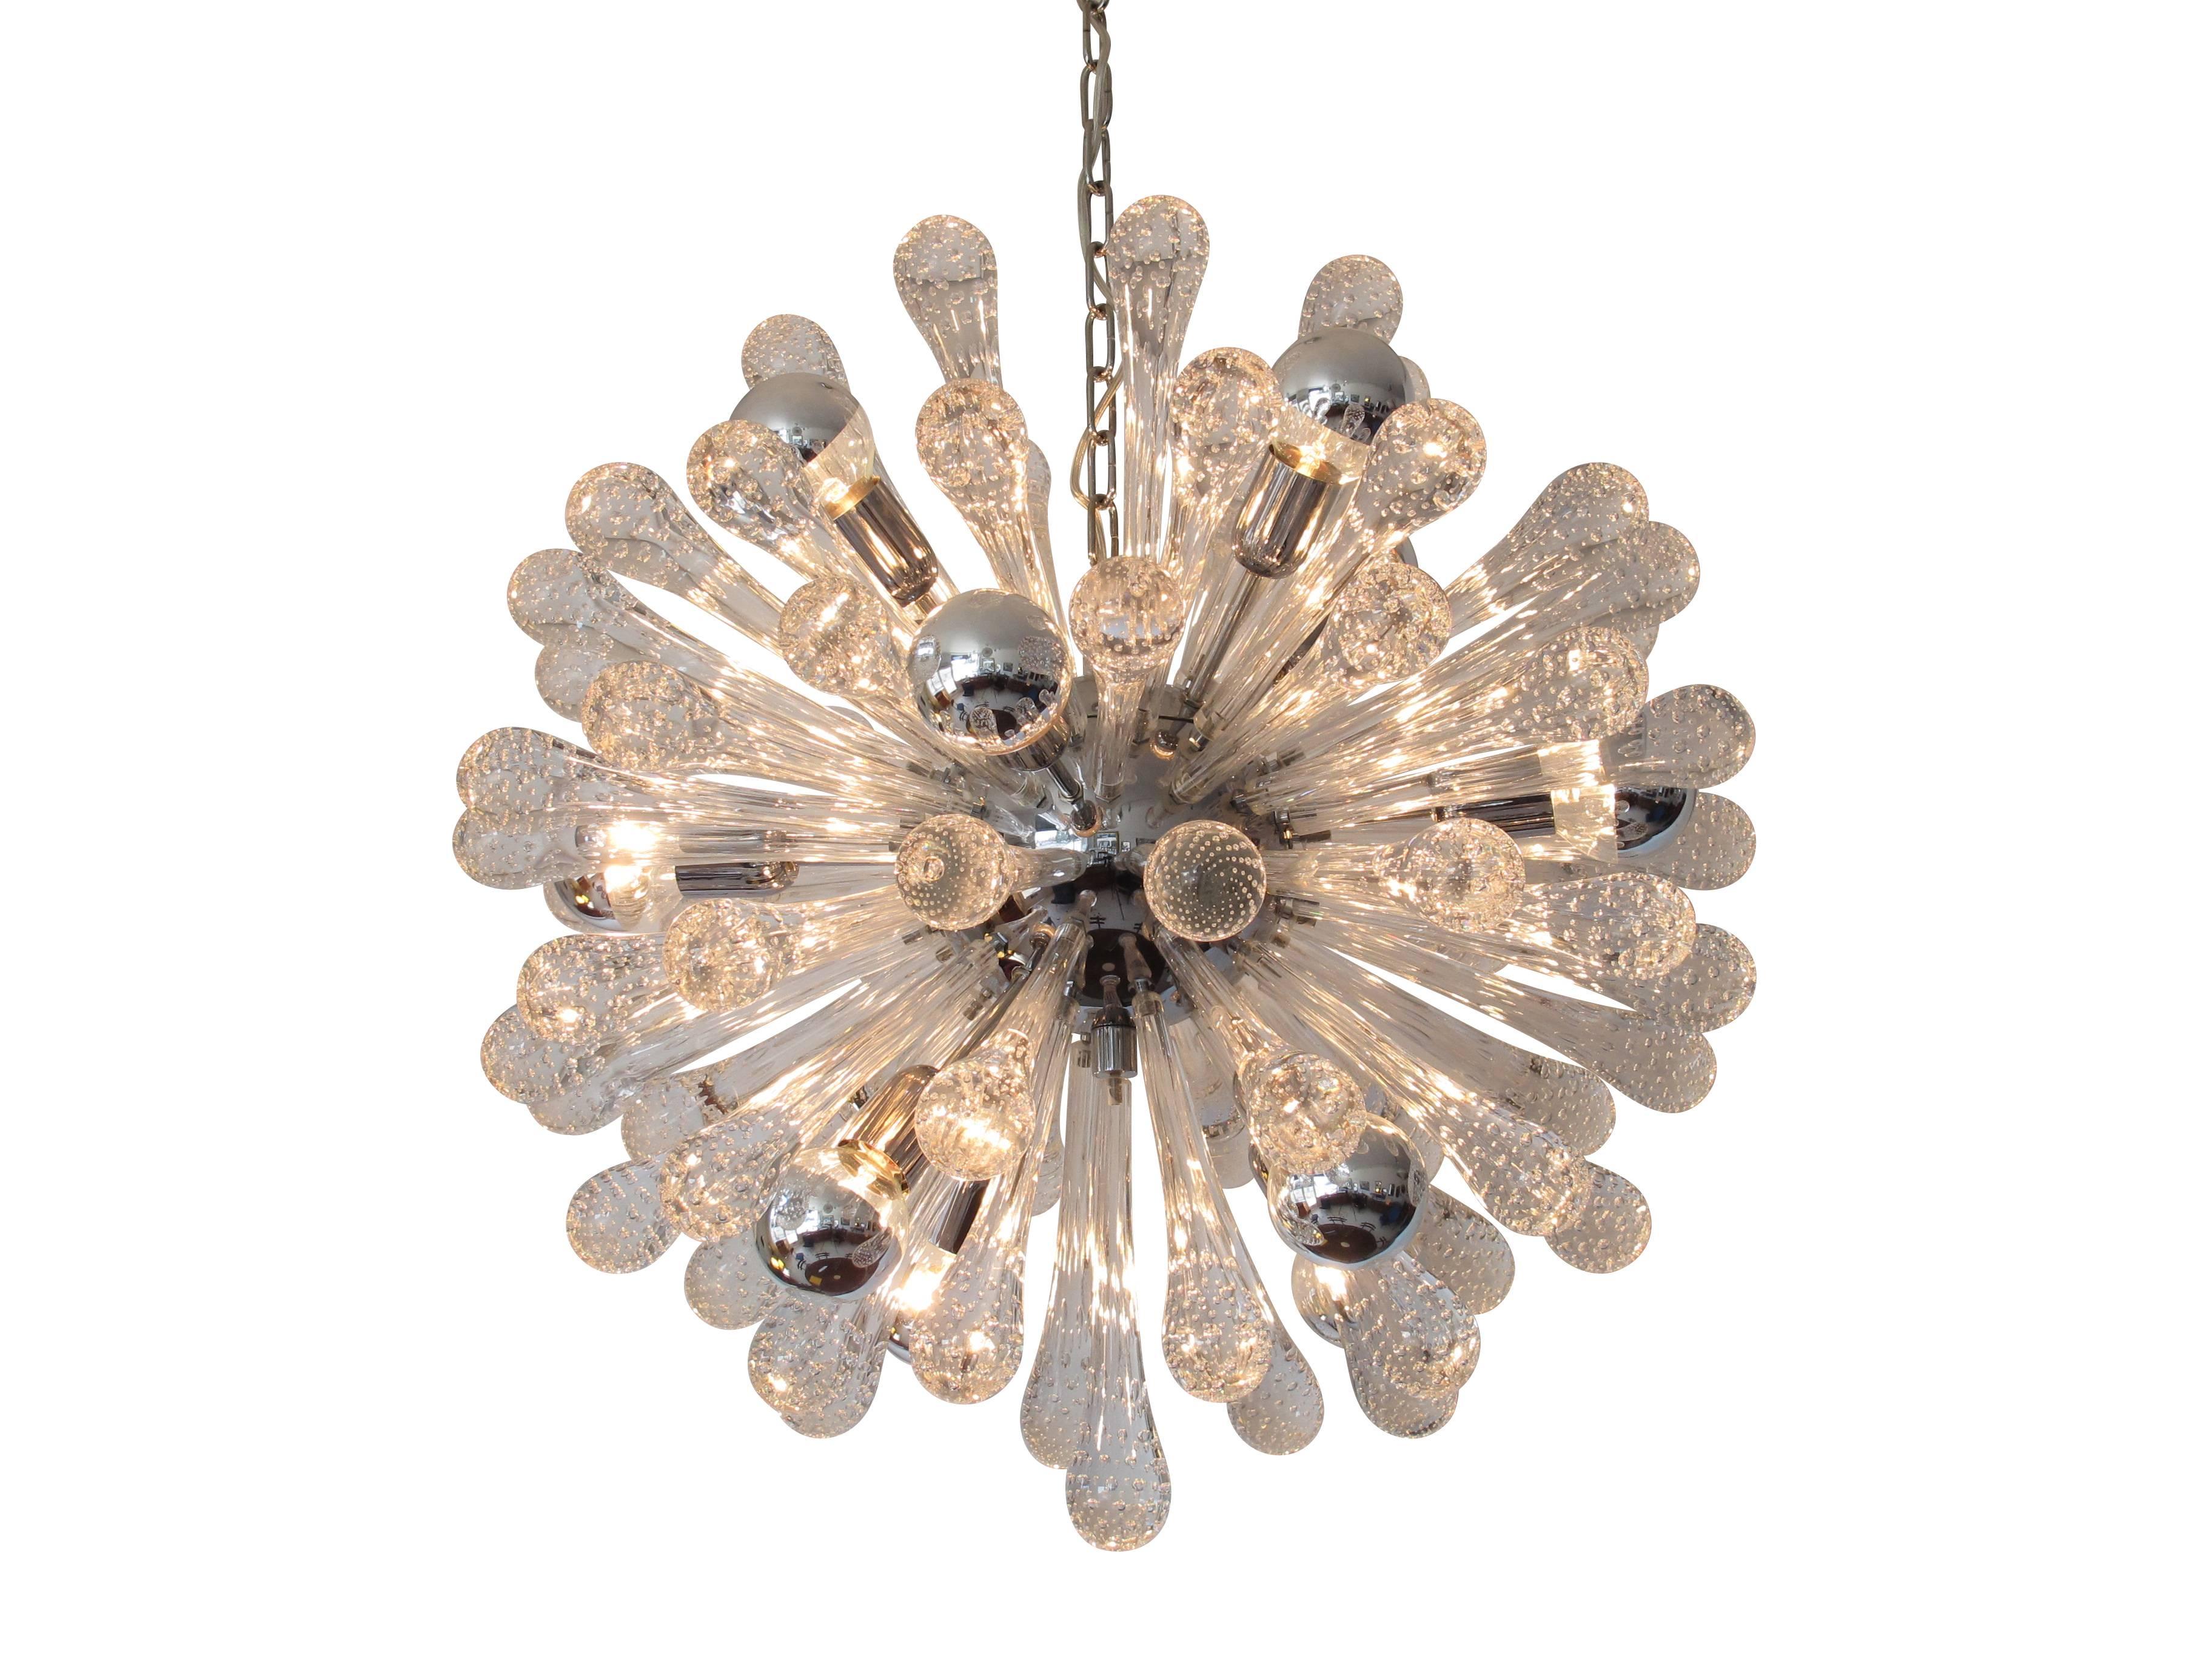 Murano Sputnik chandelier with 76 tear-drop bubble encased glass rods, twelve lights, on a chrome centre. Matching nine-light chandelier also available upon request.